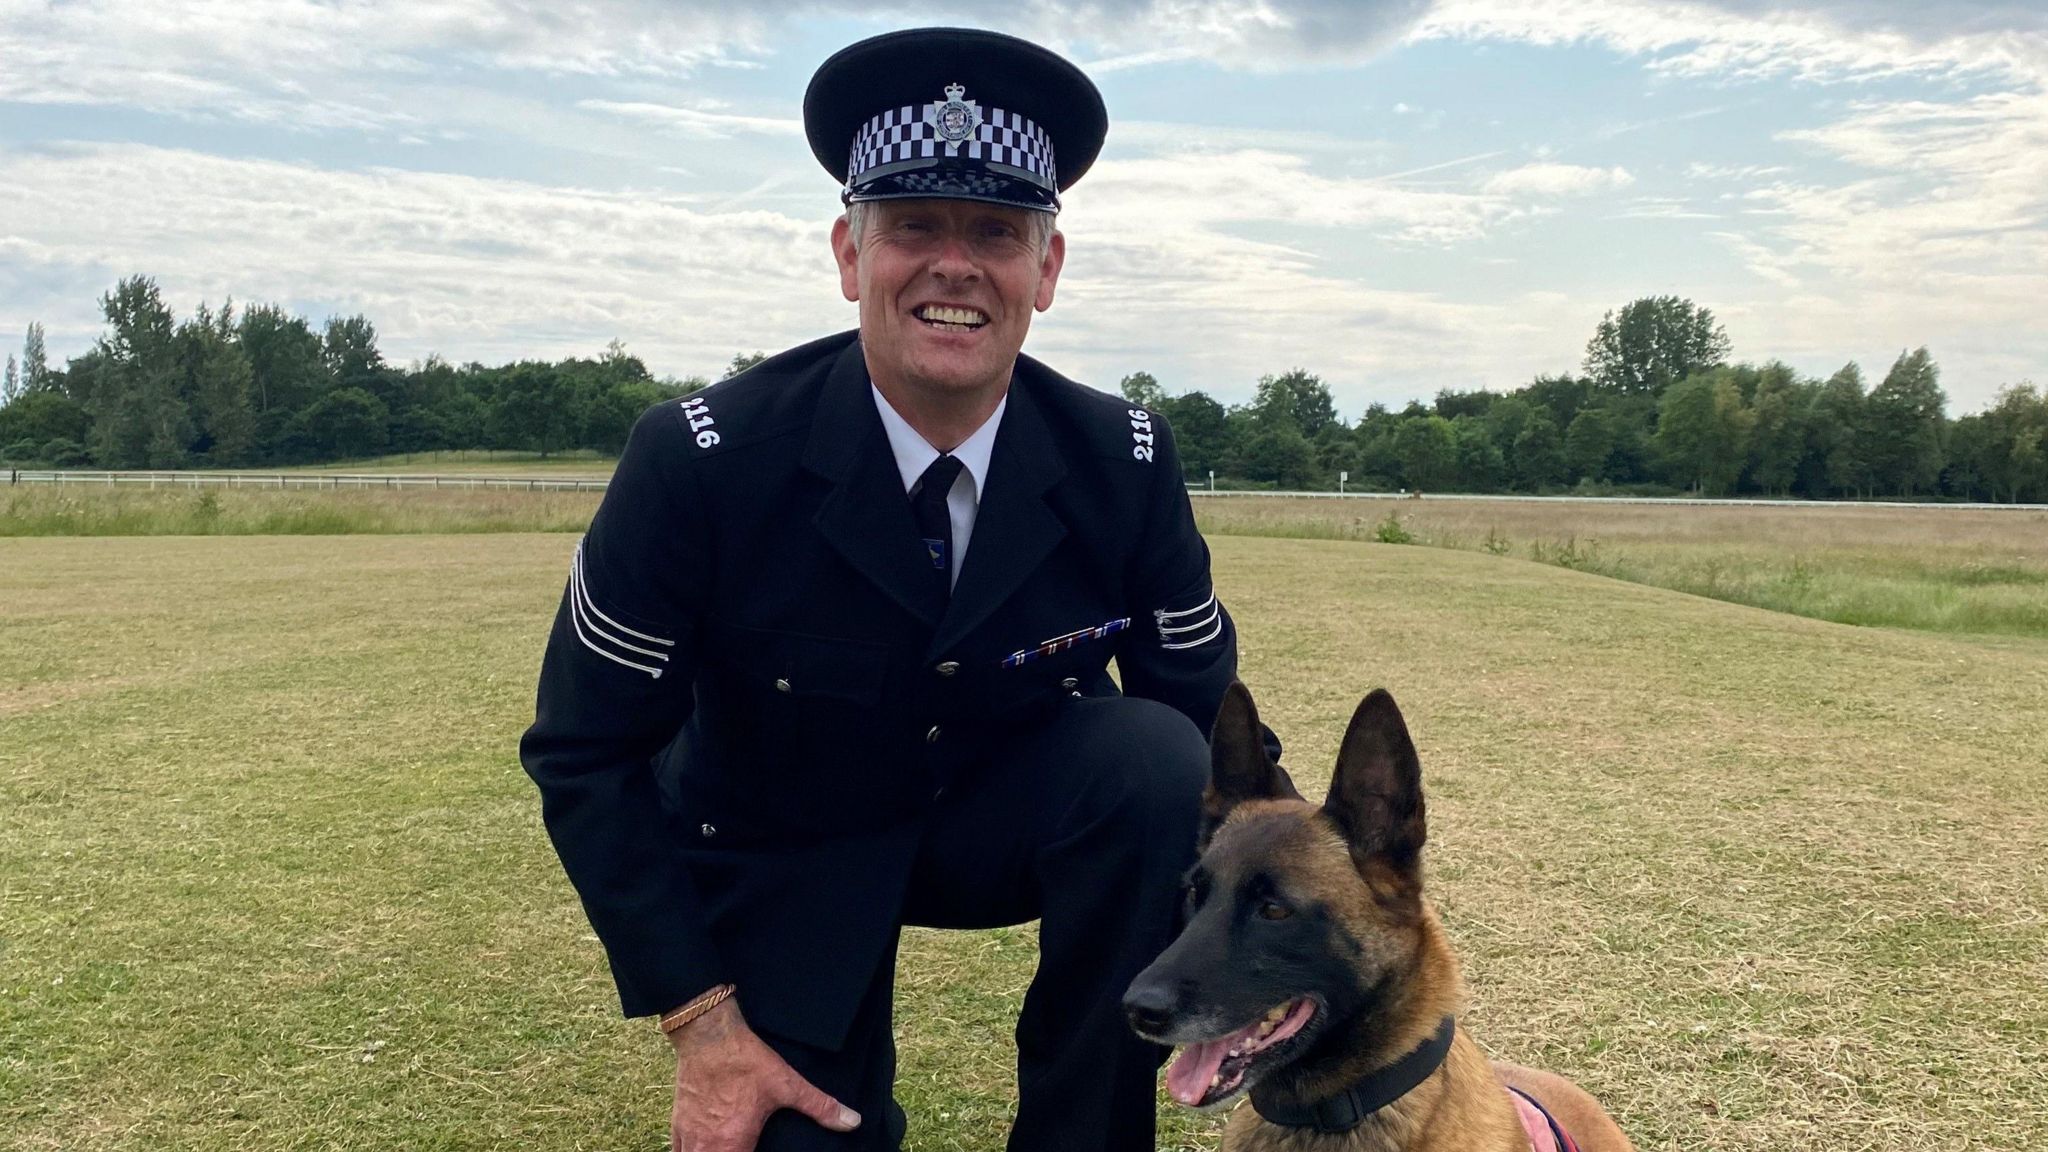 Nick and police dog Eva together, he is smiling at the camera and wearing his full uniform